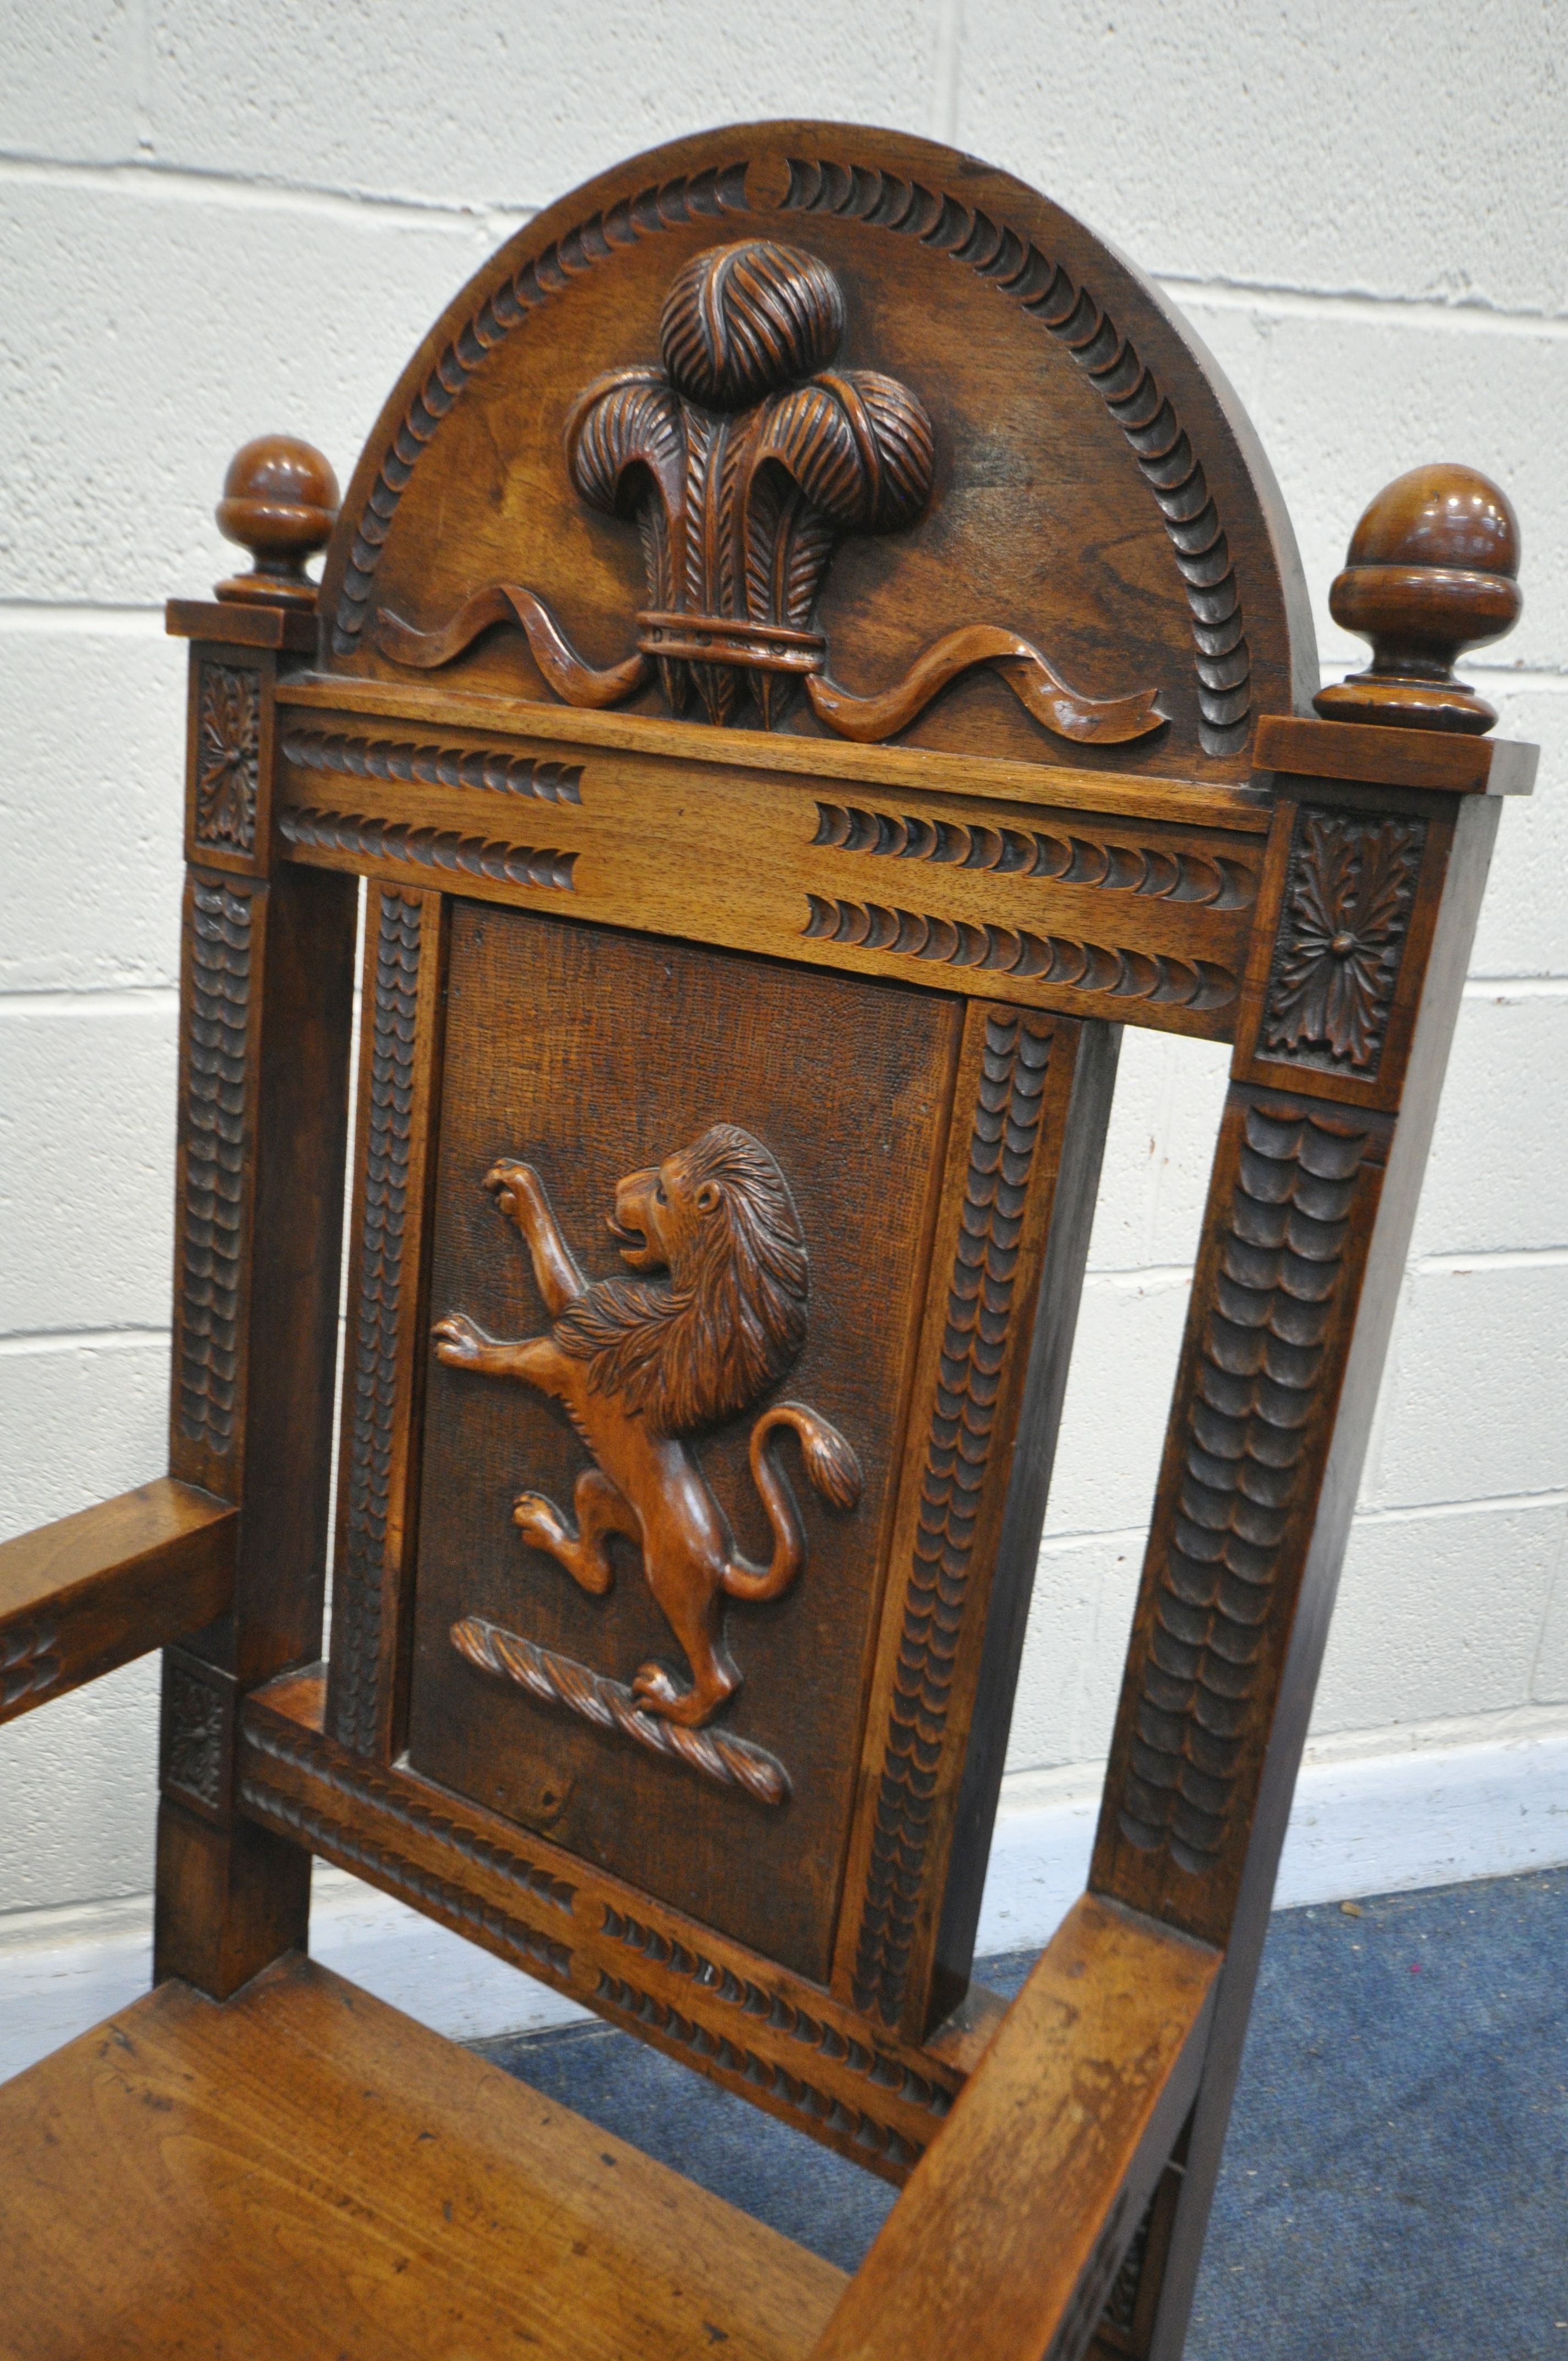 A LATE 19TH/ EARLY 20TH CENTURY CARVED OAK WAINSCOT CHAIR, the arched top depicting - Image 3 of 7